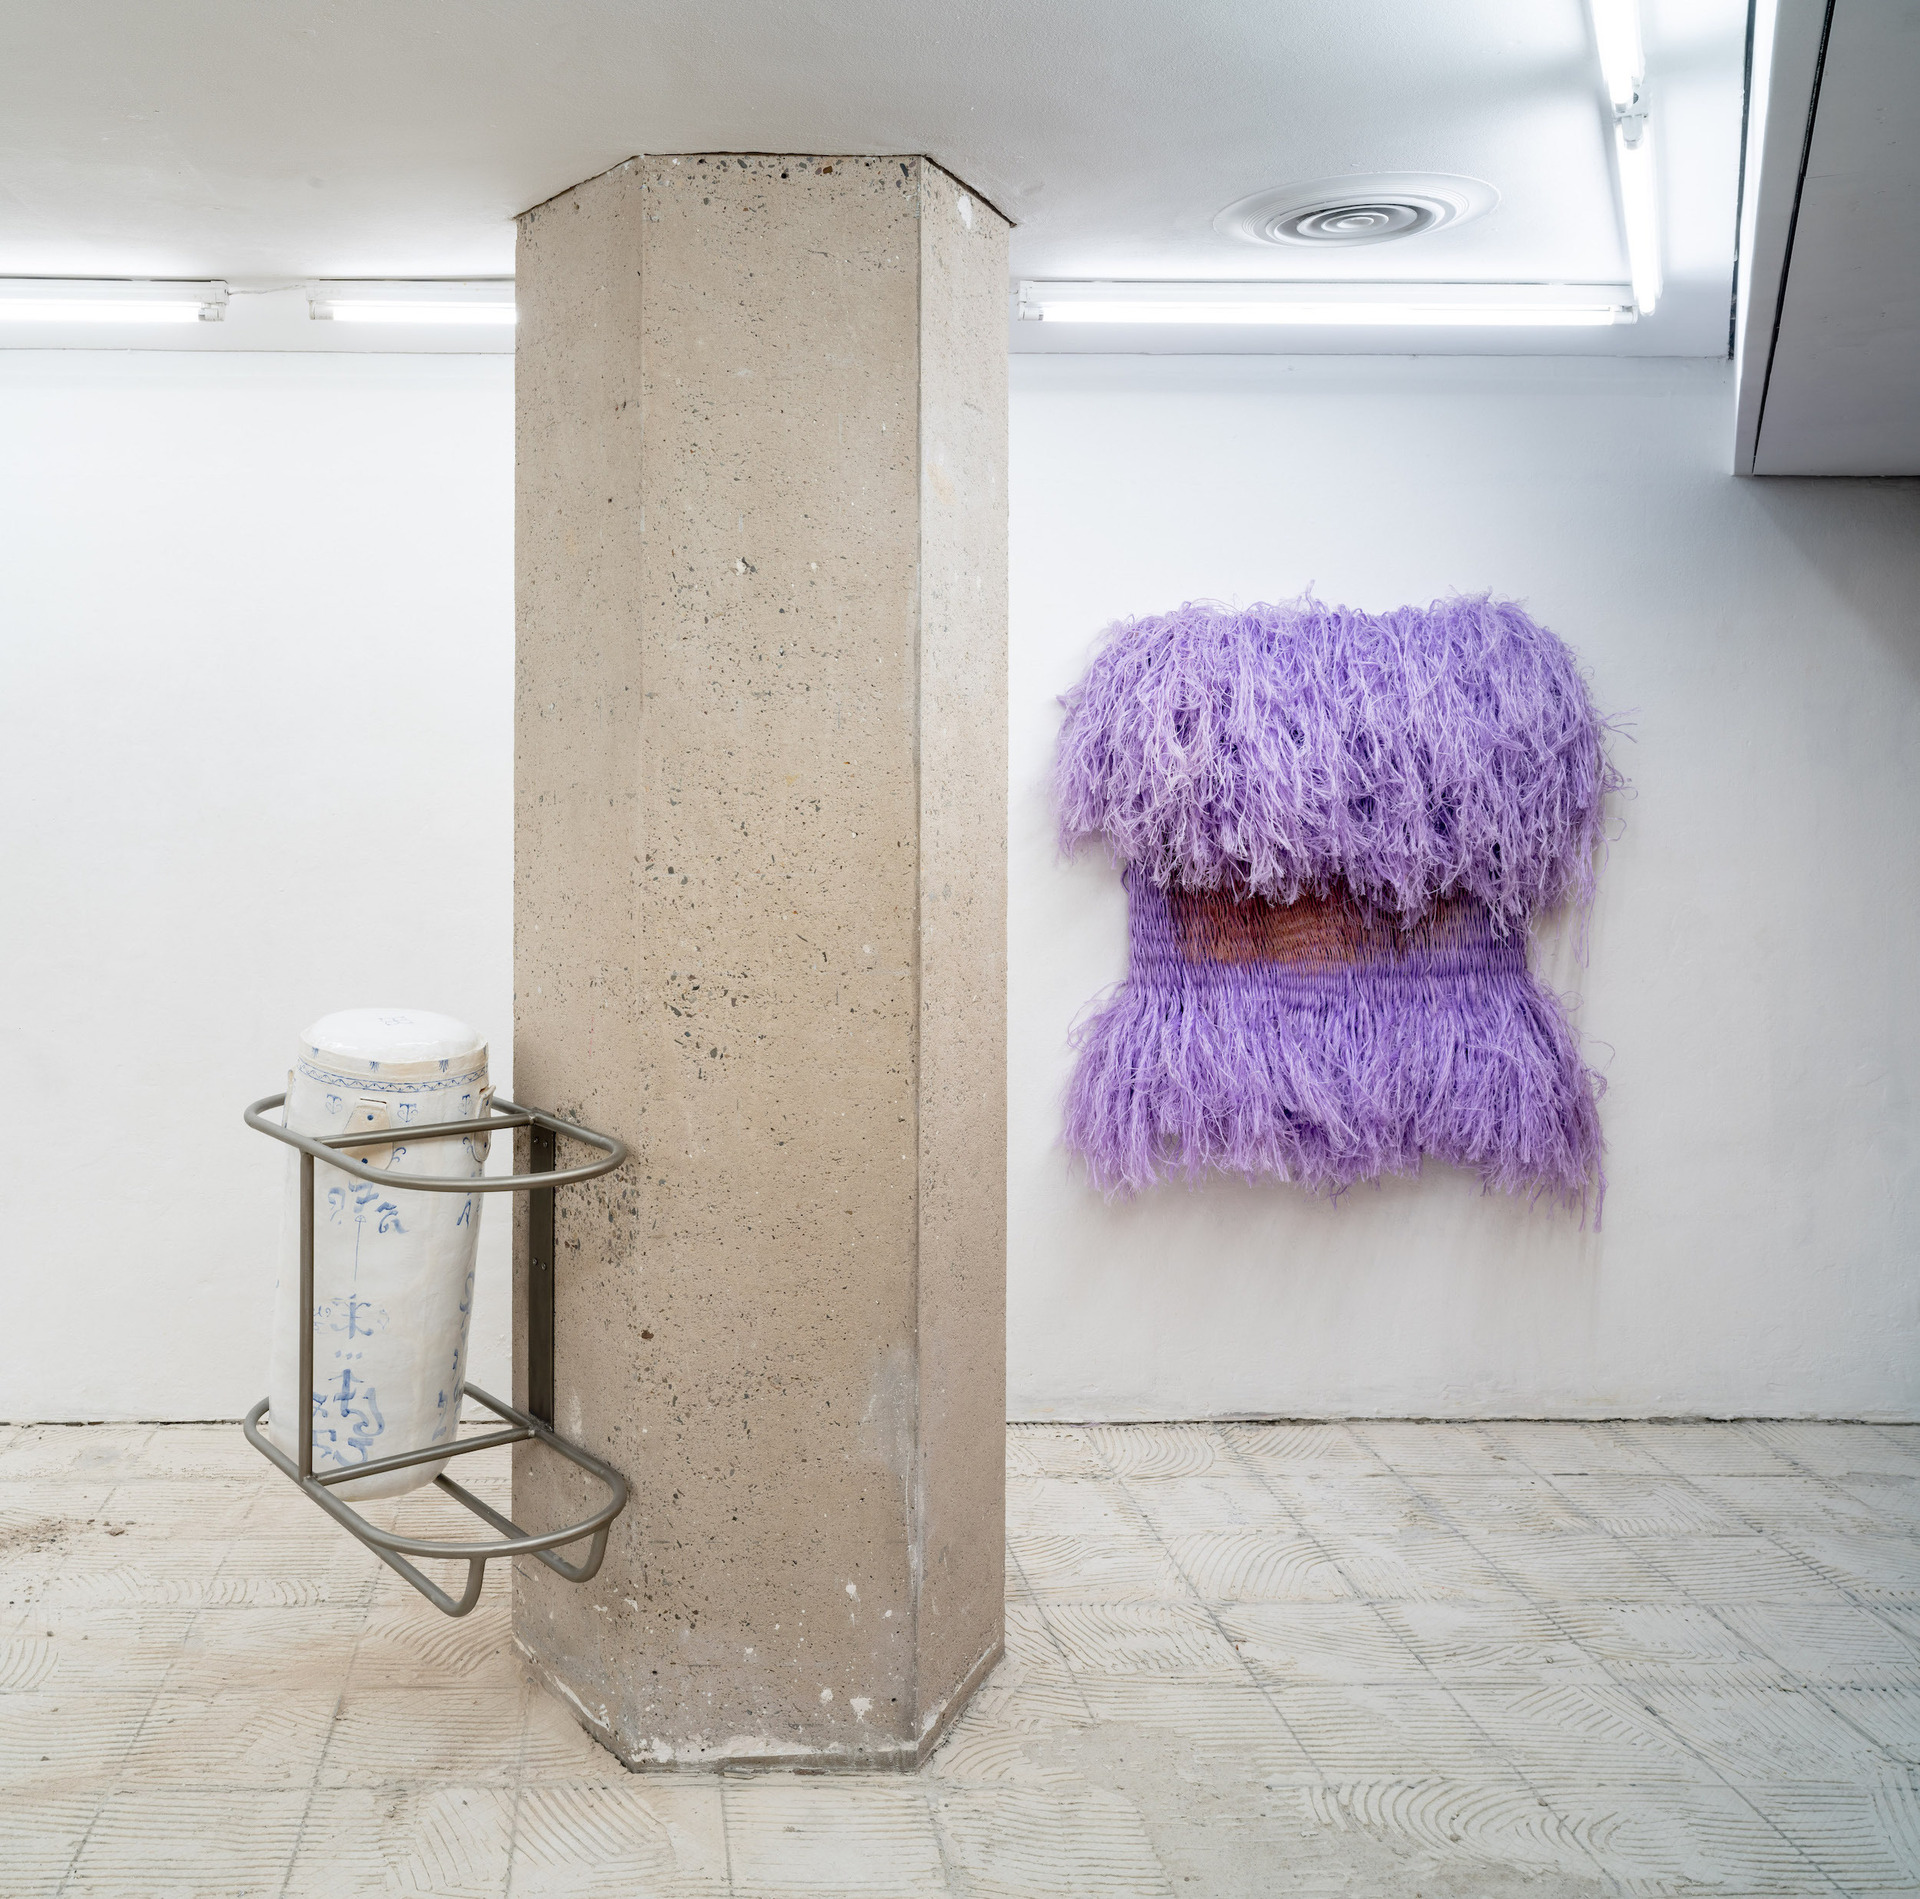 Sabrina Podemski: o.T. (2021), ceramics 85 x 35 x 35 cm, steel frame, 80 x 60 cm (left); Rebekka Kronsteiner: open end I, serie/work group anonymous reference of domestication (2021), press cord, latex, acrylic, 110 x 110 cm (right)